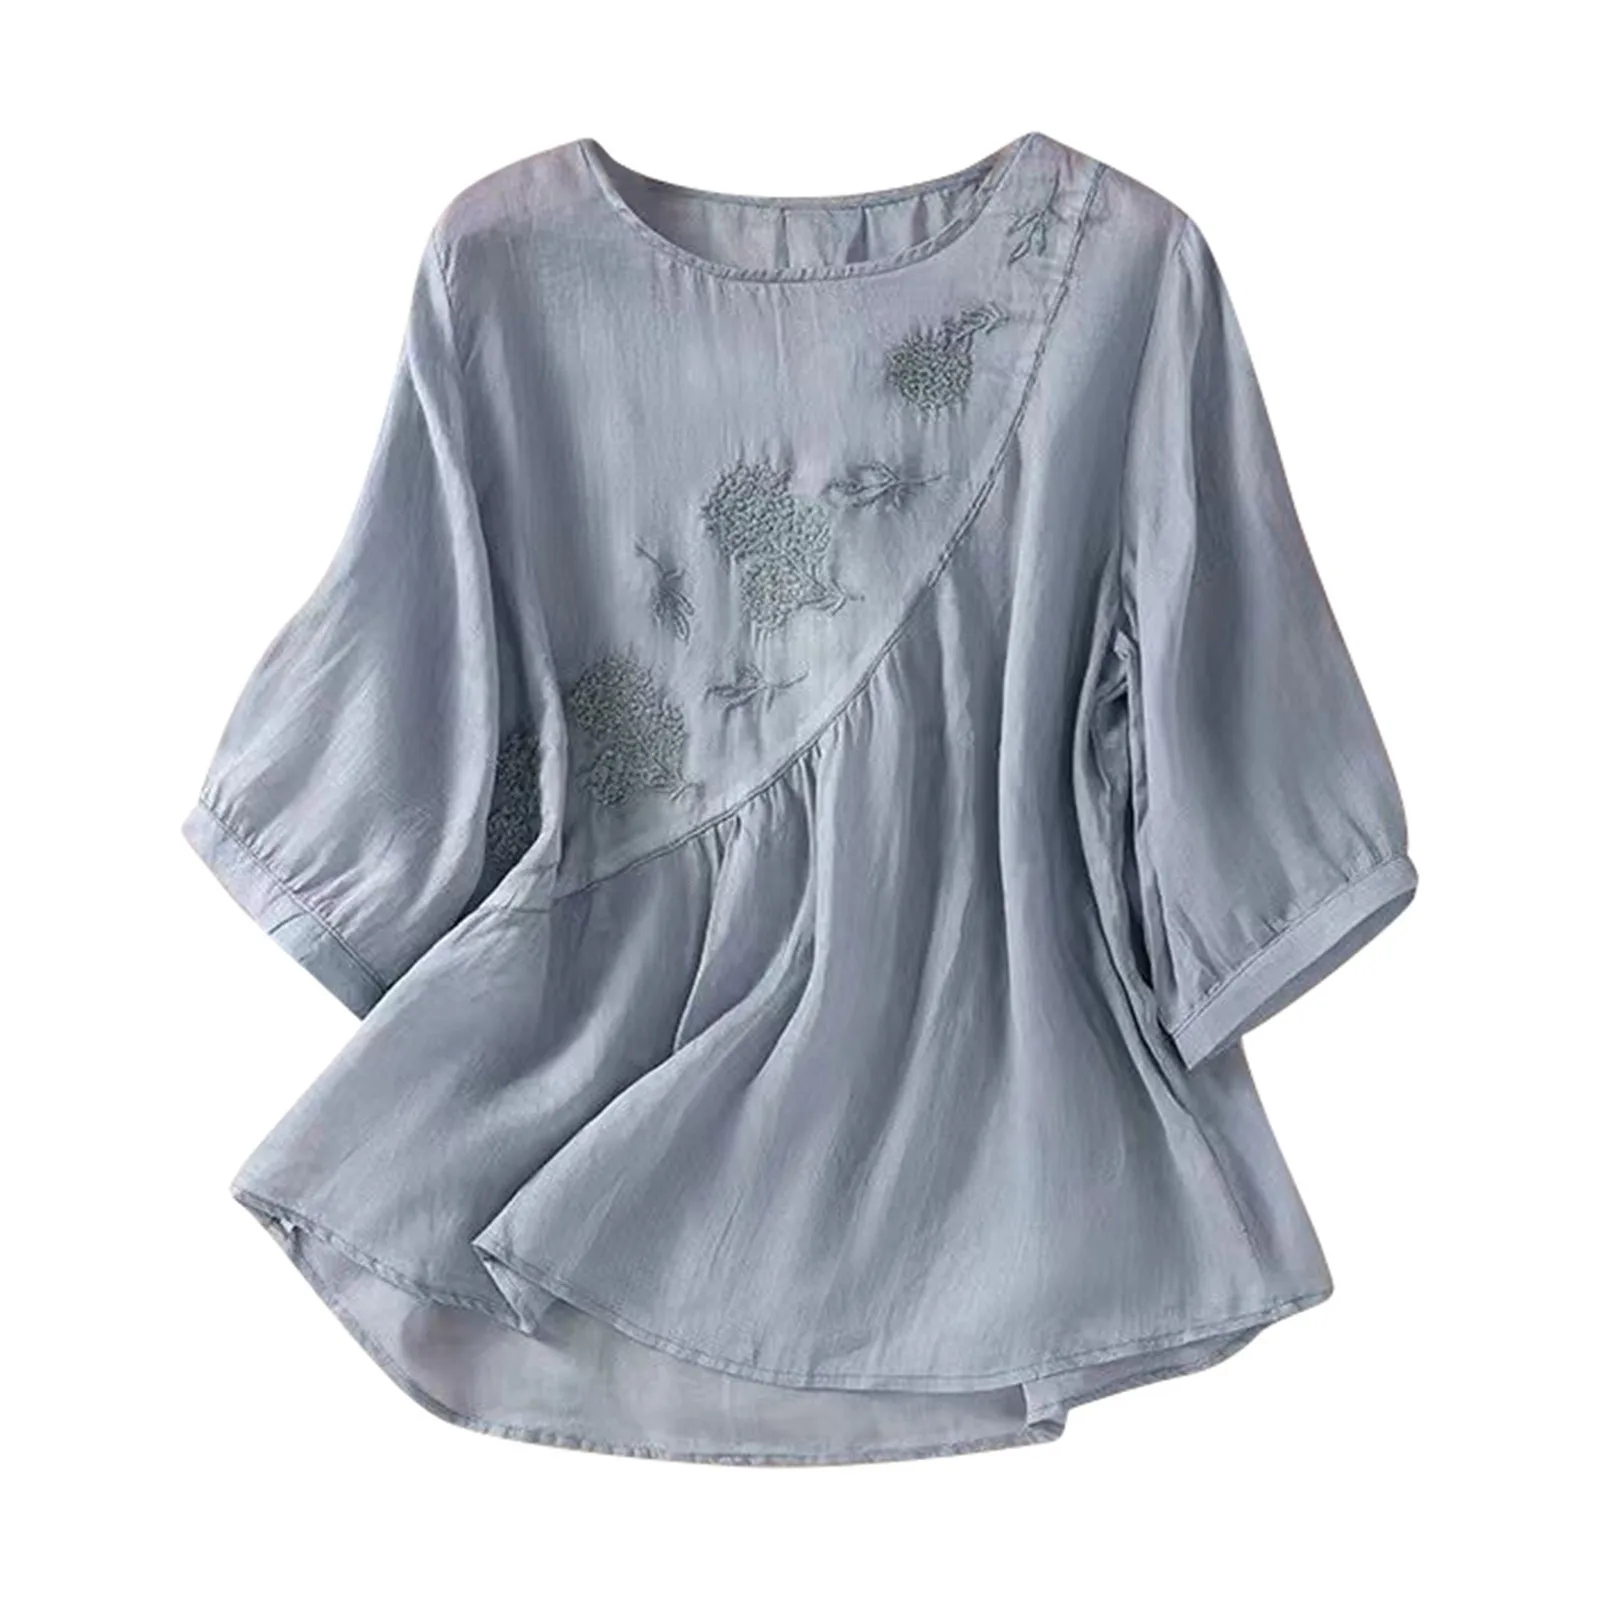 

Spring/Summer Women's Embroidered Round Neck Long Sleeve T Shirt Vintage Bohemian Loose Fit Floral Applique Top